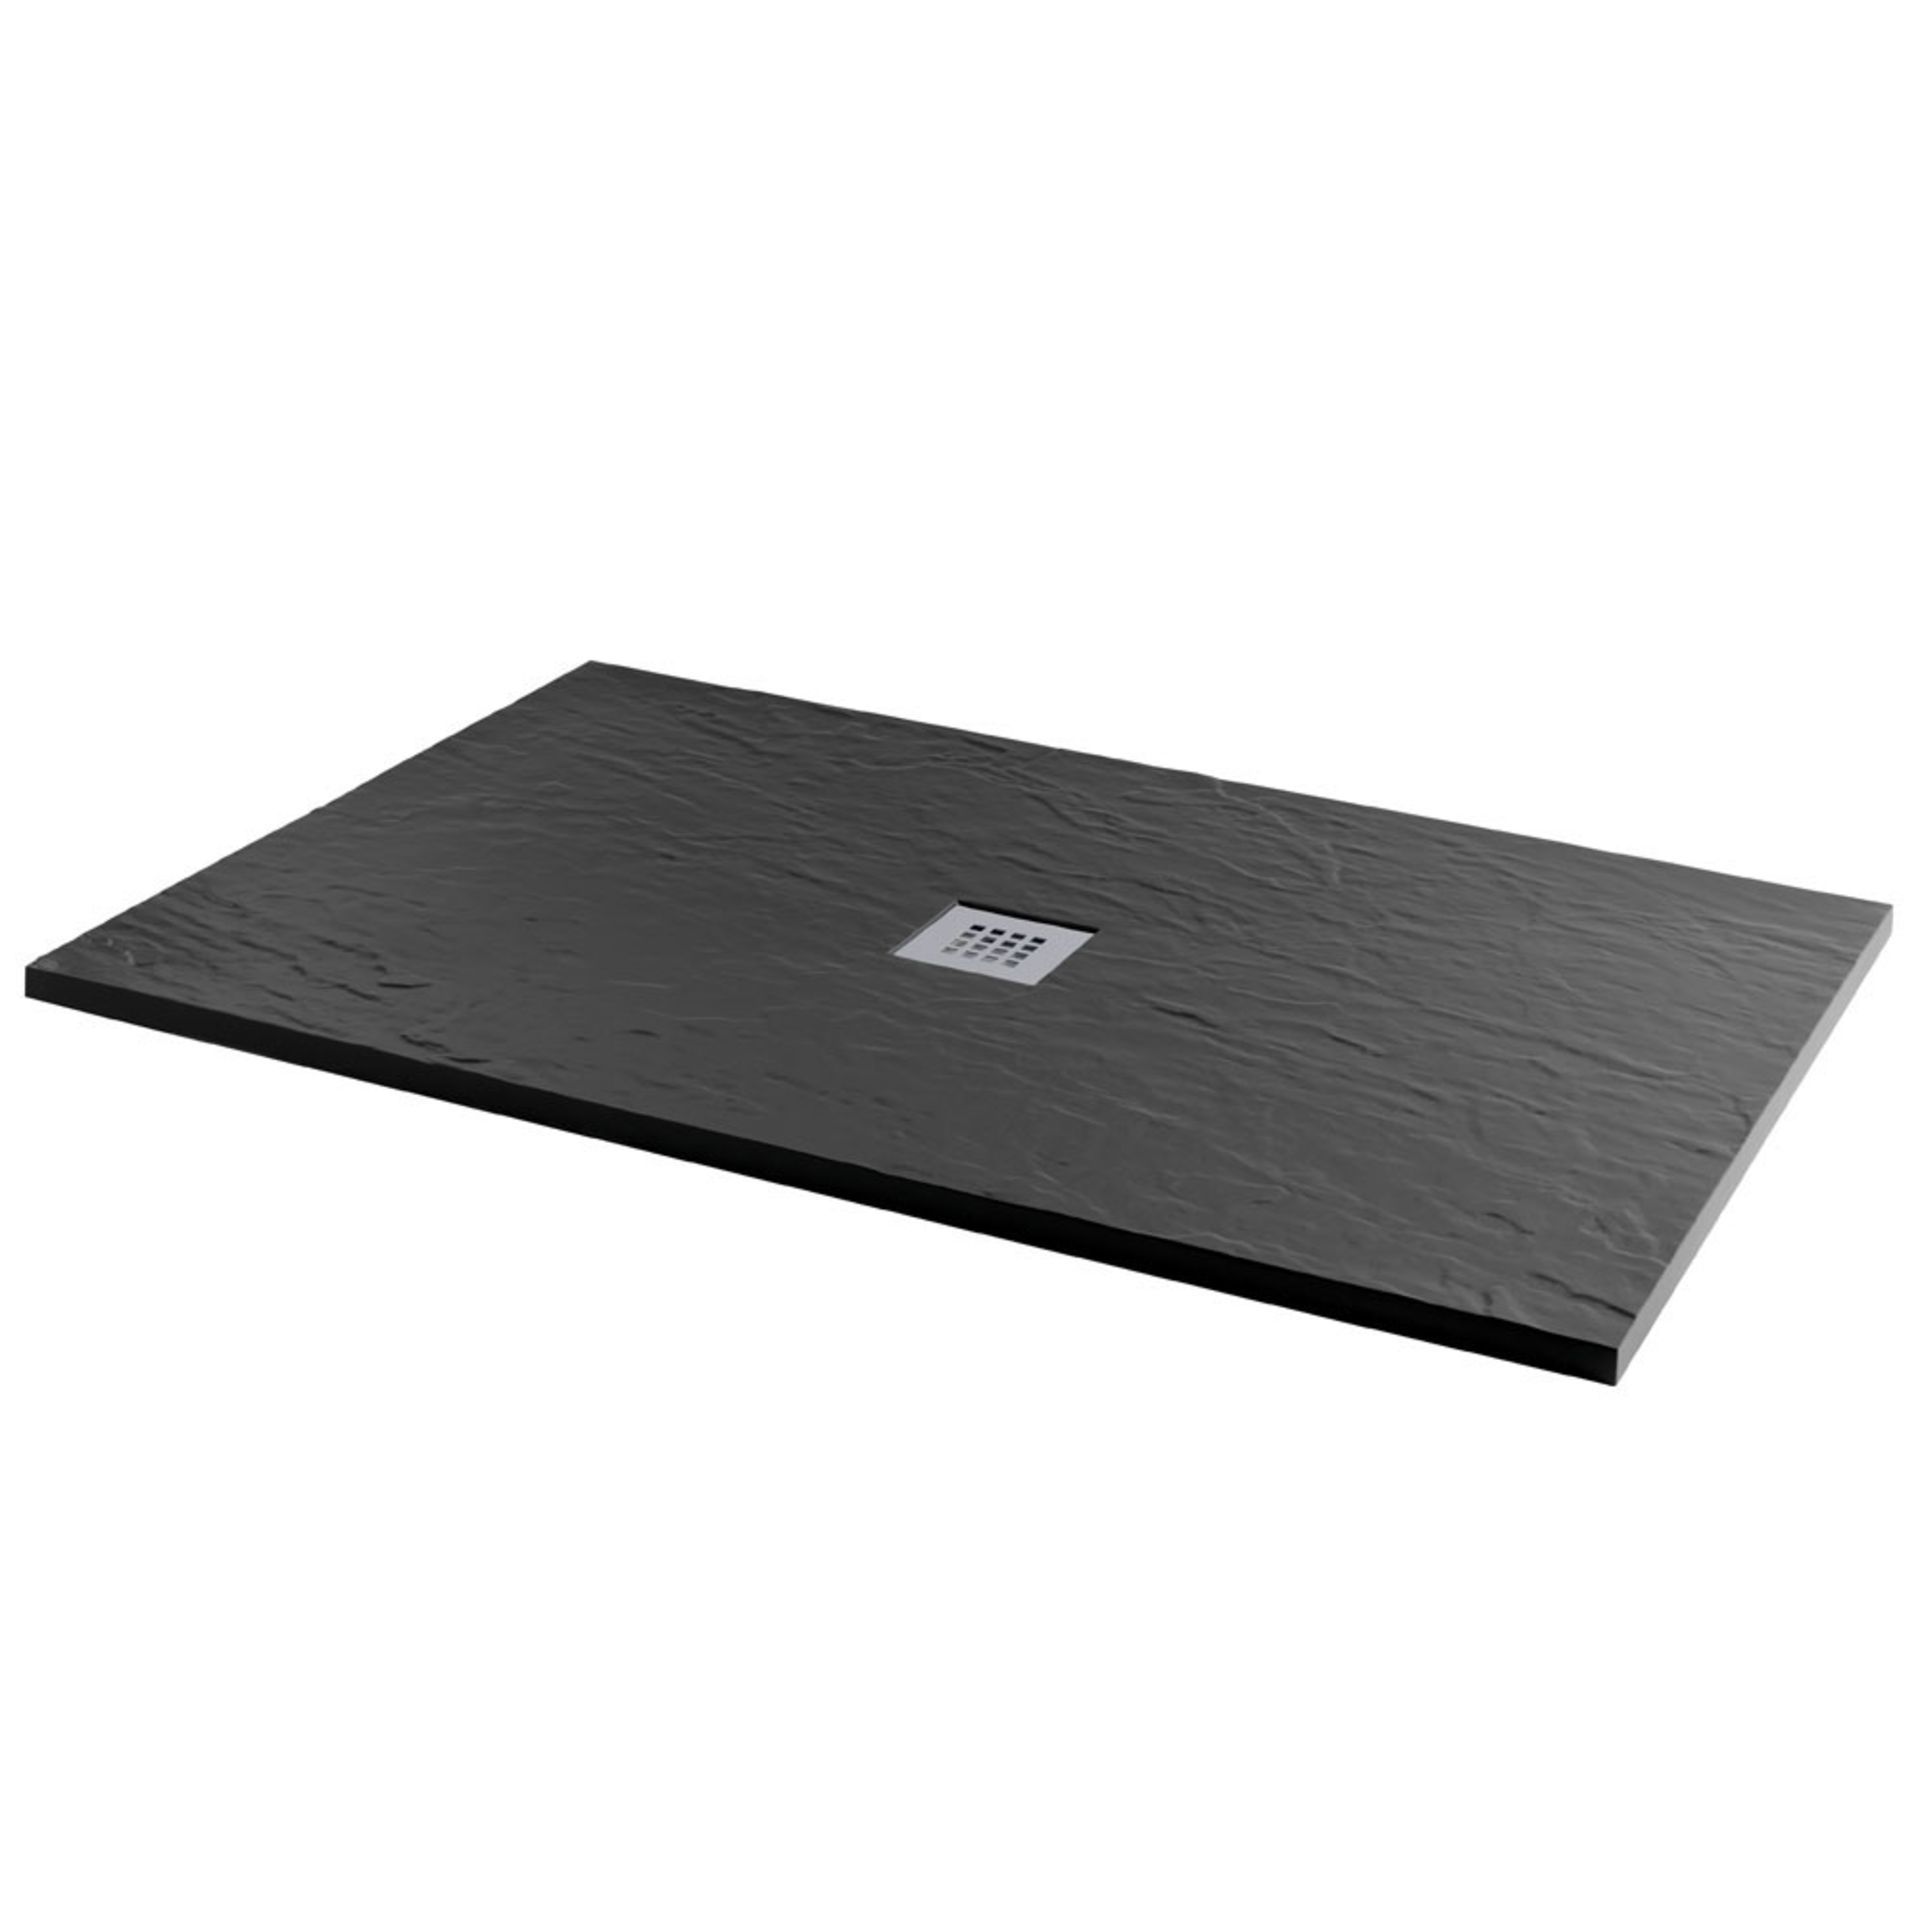 New 1000x800mm Rectangle Black Slate Effect Shower Tray. RRP £569.99.A Textured Black Slate Effect - Image 2 of 2